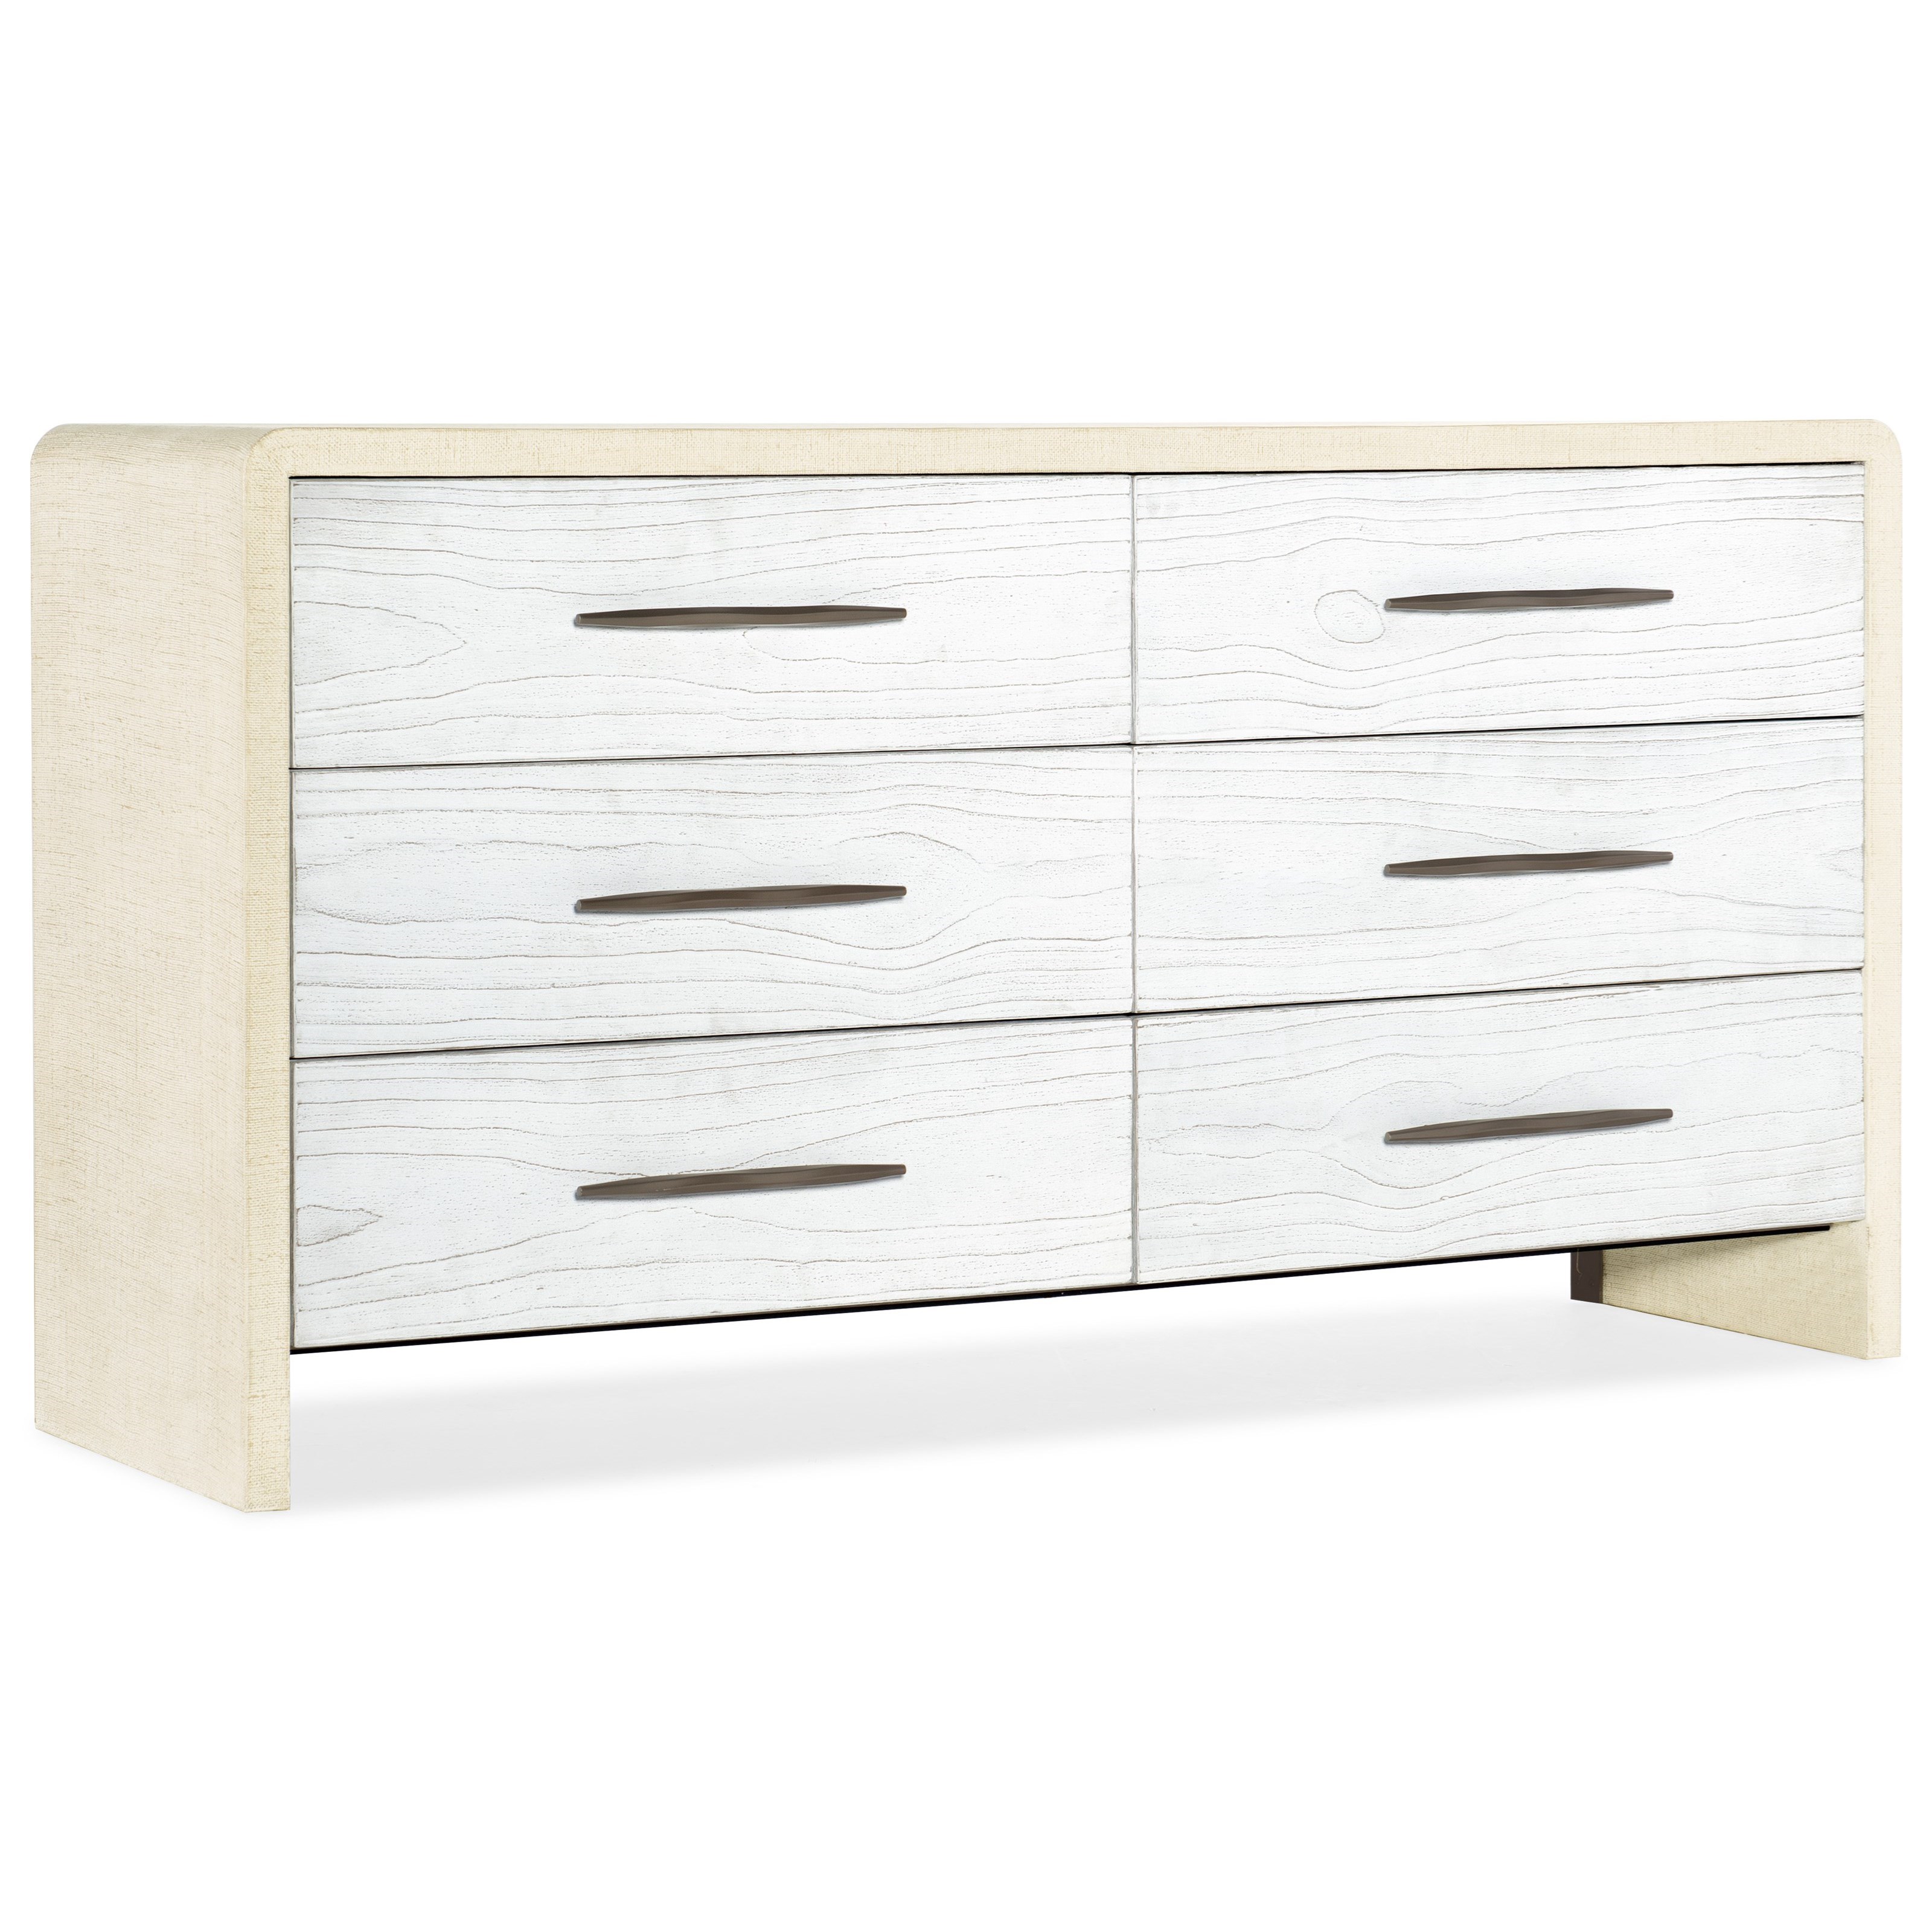 Contemporary Dresser with Self-Closing Drawers